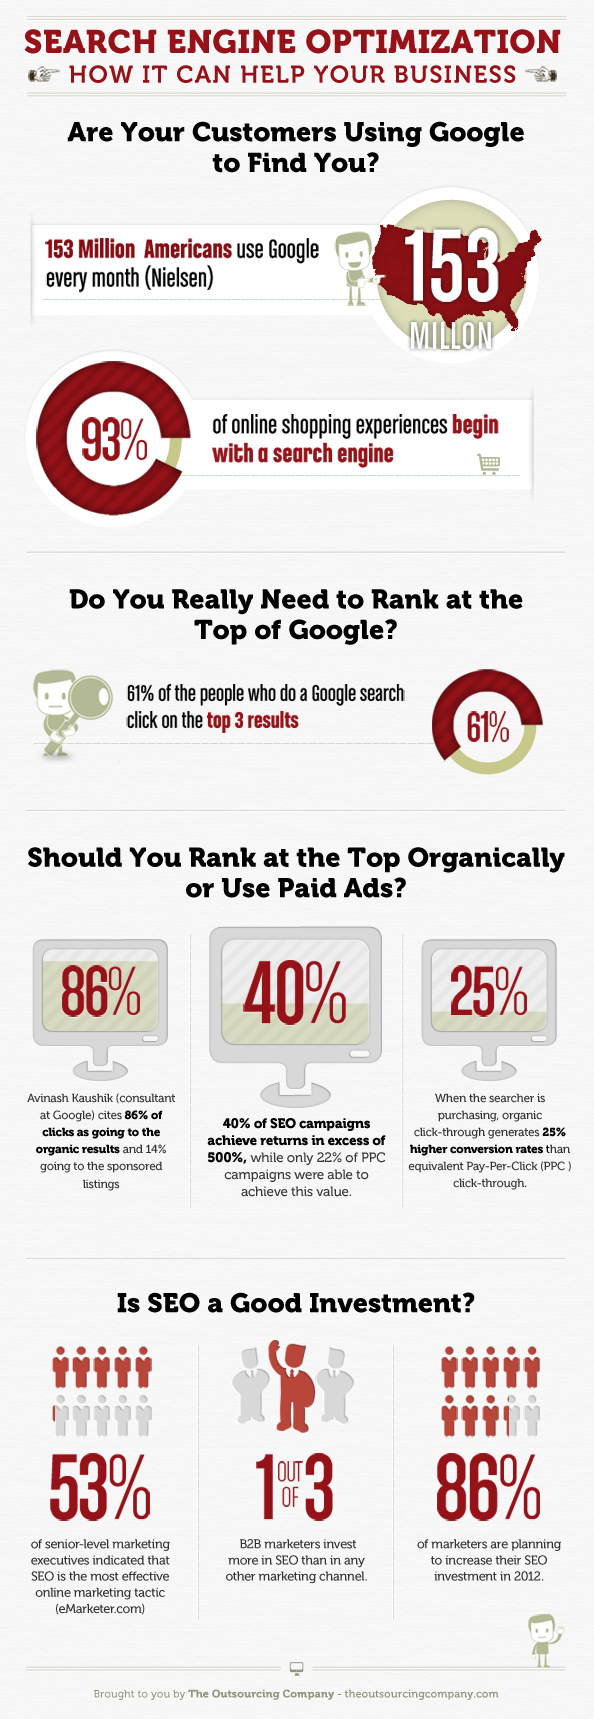 Search Engine Optimization and how it can help your business